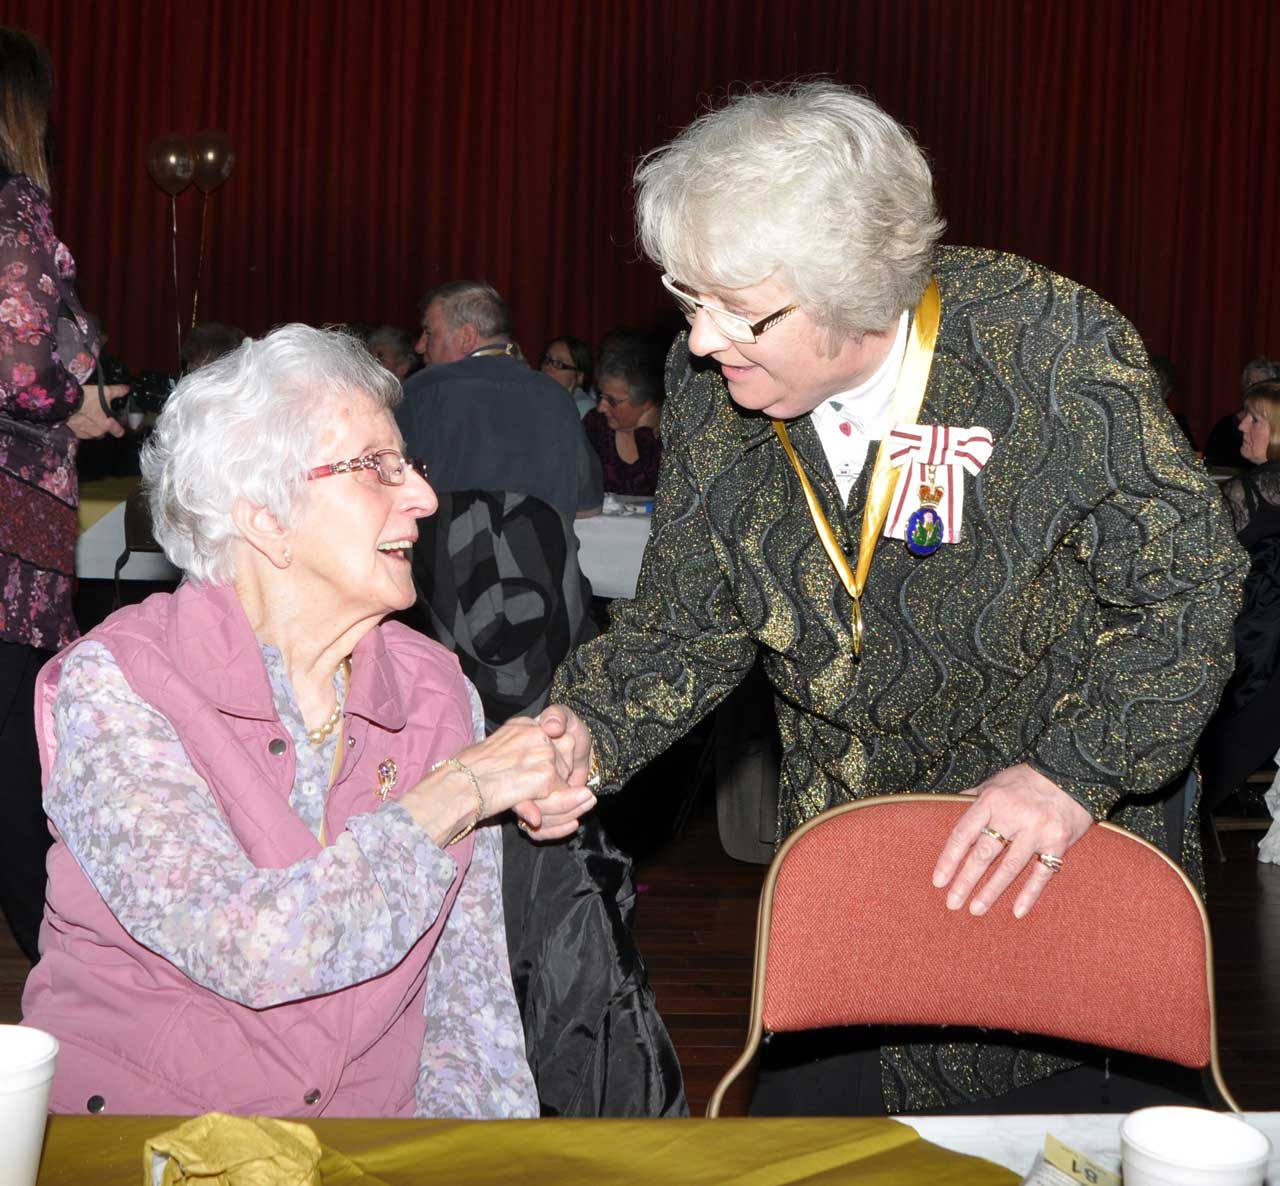 Photo: Wick's Annual Party Treat For Senior Citizens